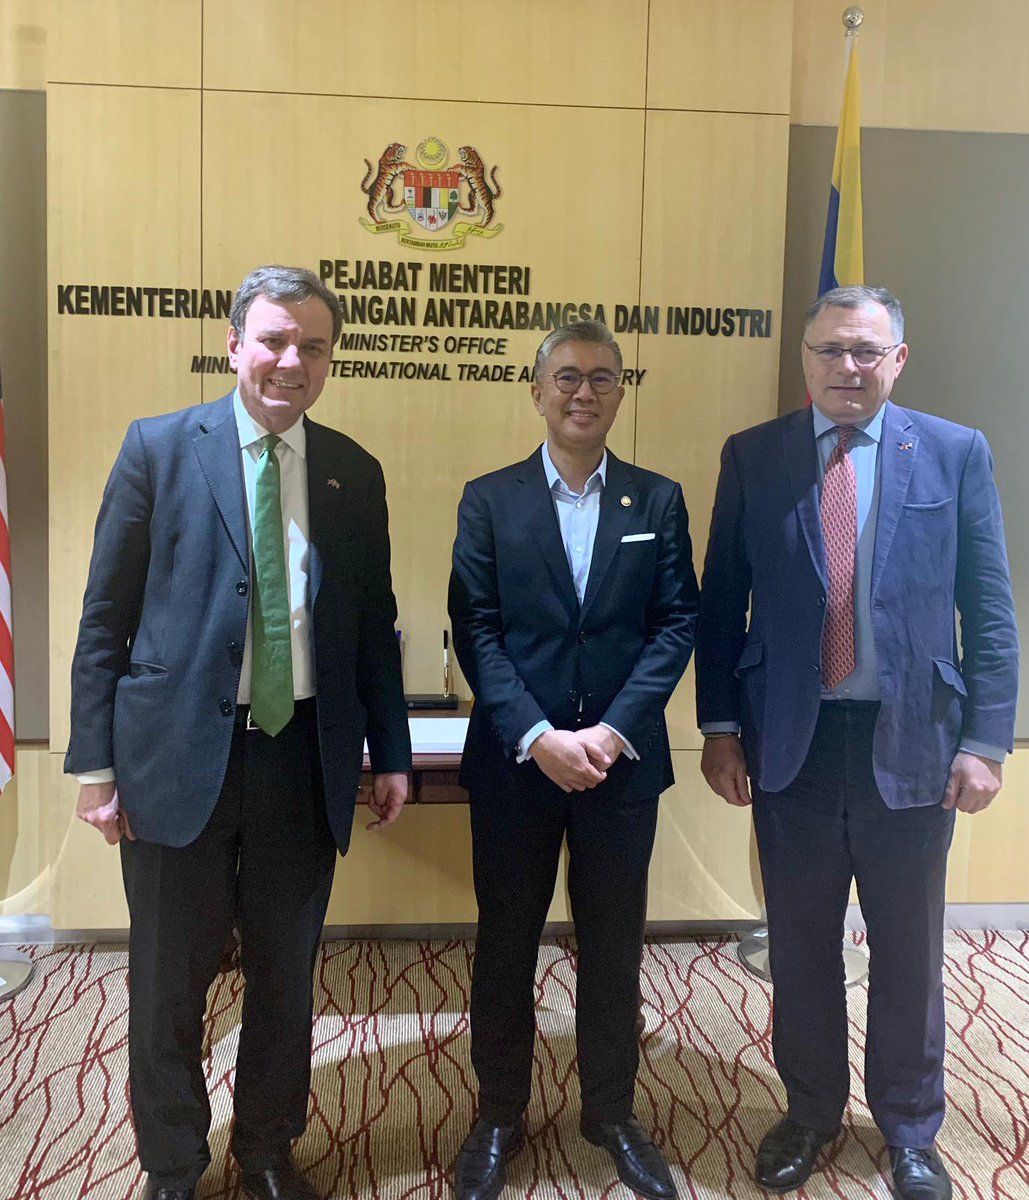 Pleasure to see @tzafrul_aziz again and congratulate Malaysia on its ratification of #CPTPP✍️    We talked about the benefits UK would bring to CPTPP 📈 taking the bloc from 12 to 15% of global GDP💸   And steps for our first Joint Economic Trade Committee (JETCO) this year 🇬🇧🇲🇾